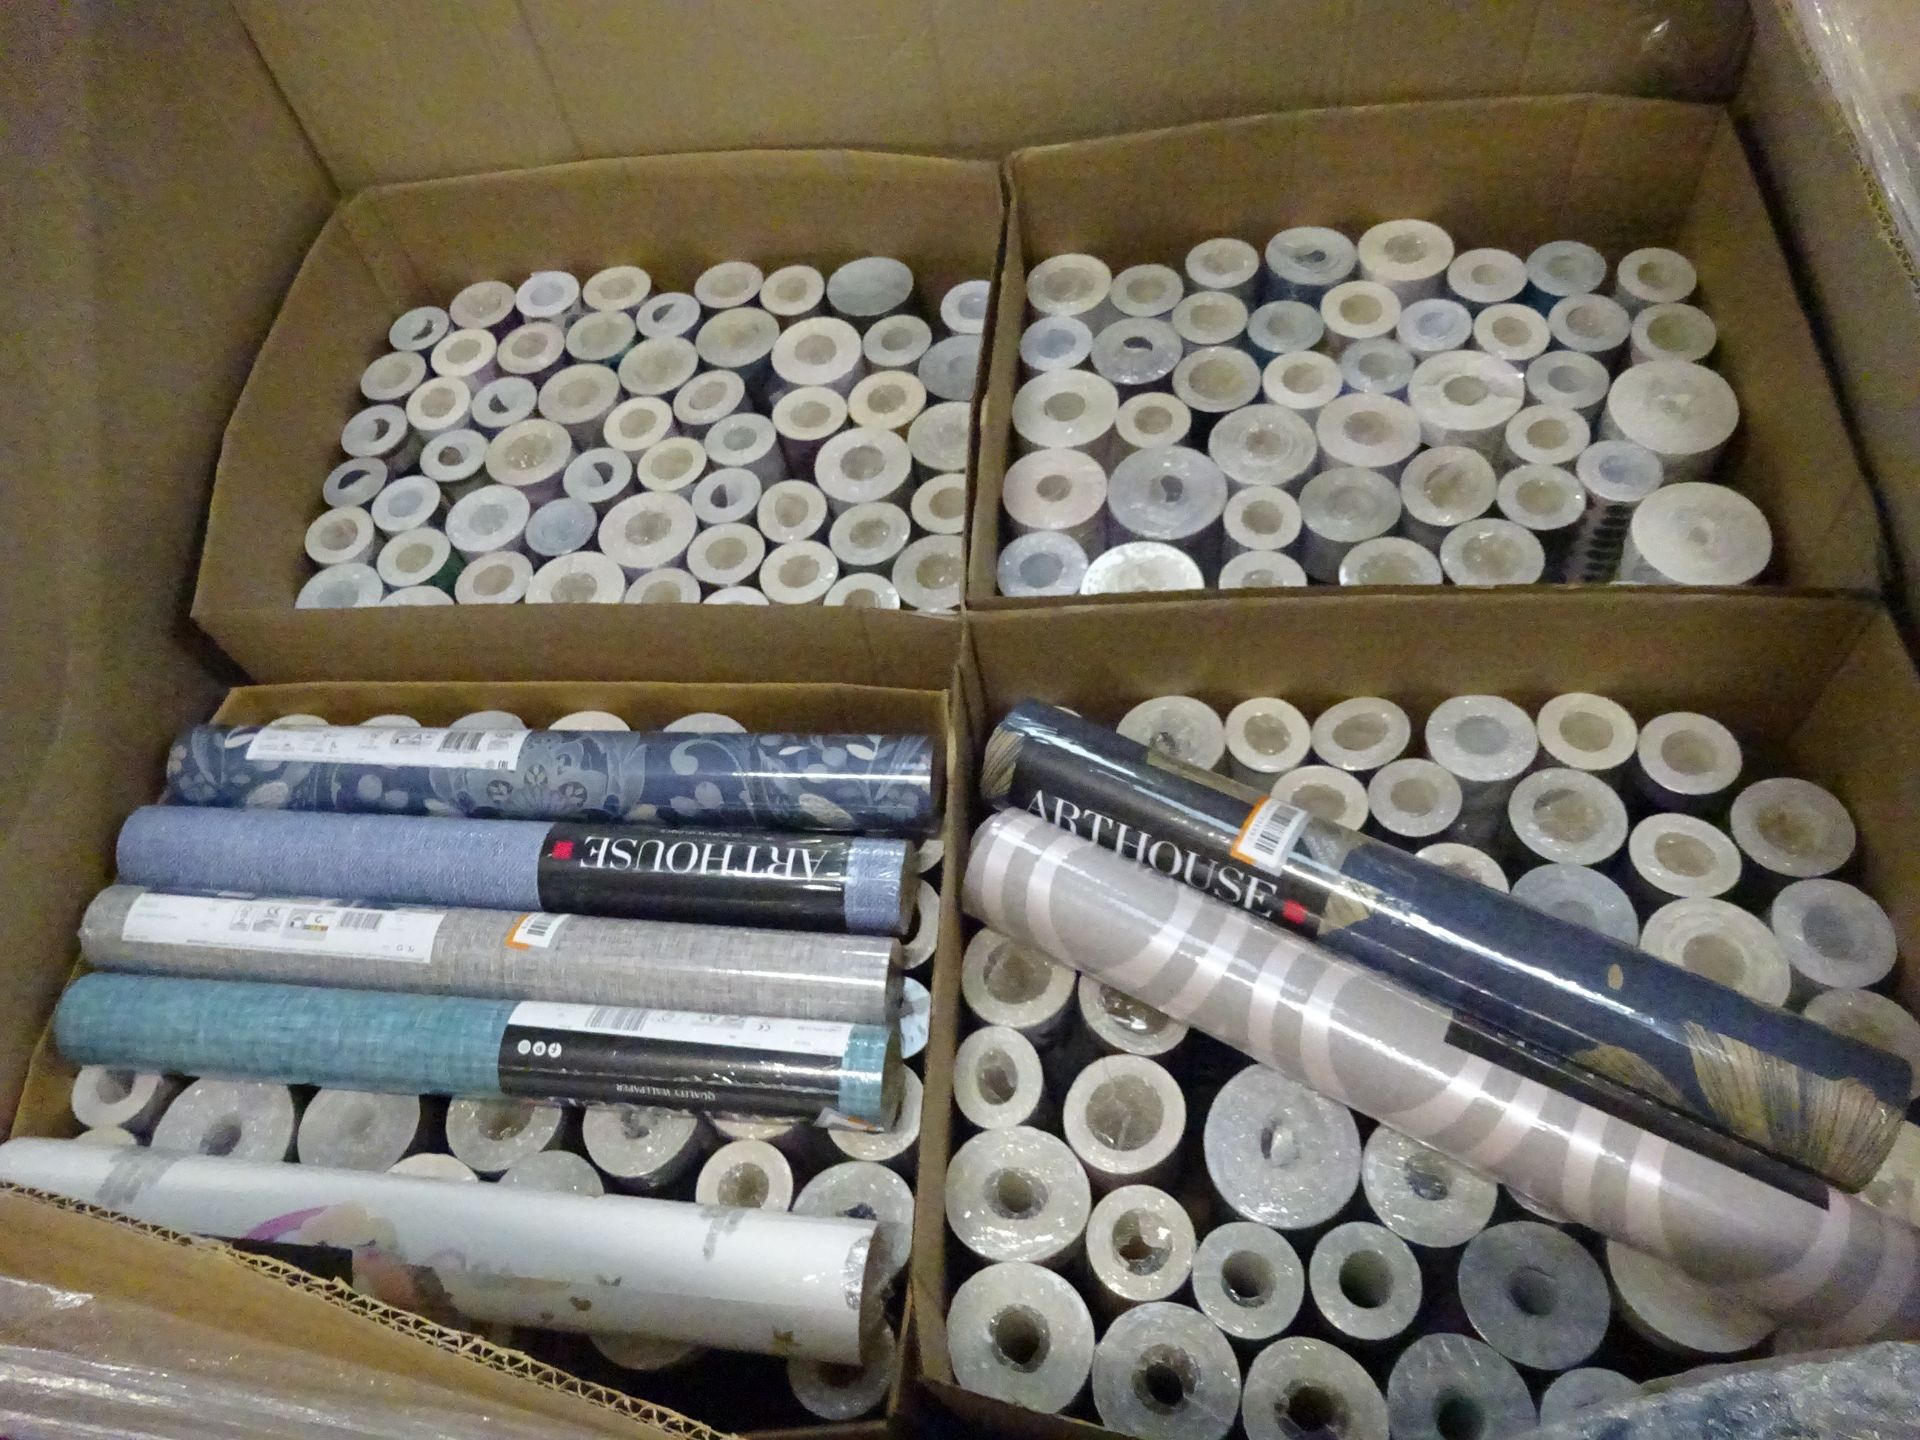 Pallet Of Arthouse Wallpaper From Next (Approx 200 Rolls Ranging From £9 to £20 per Roll) - Image 2 of 2